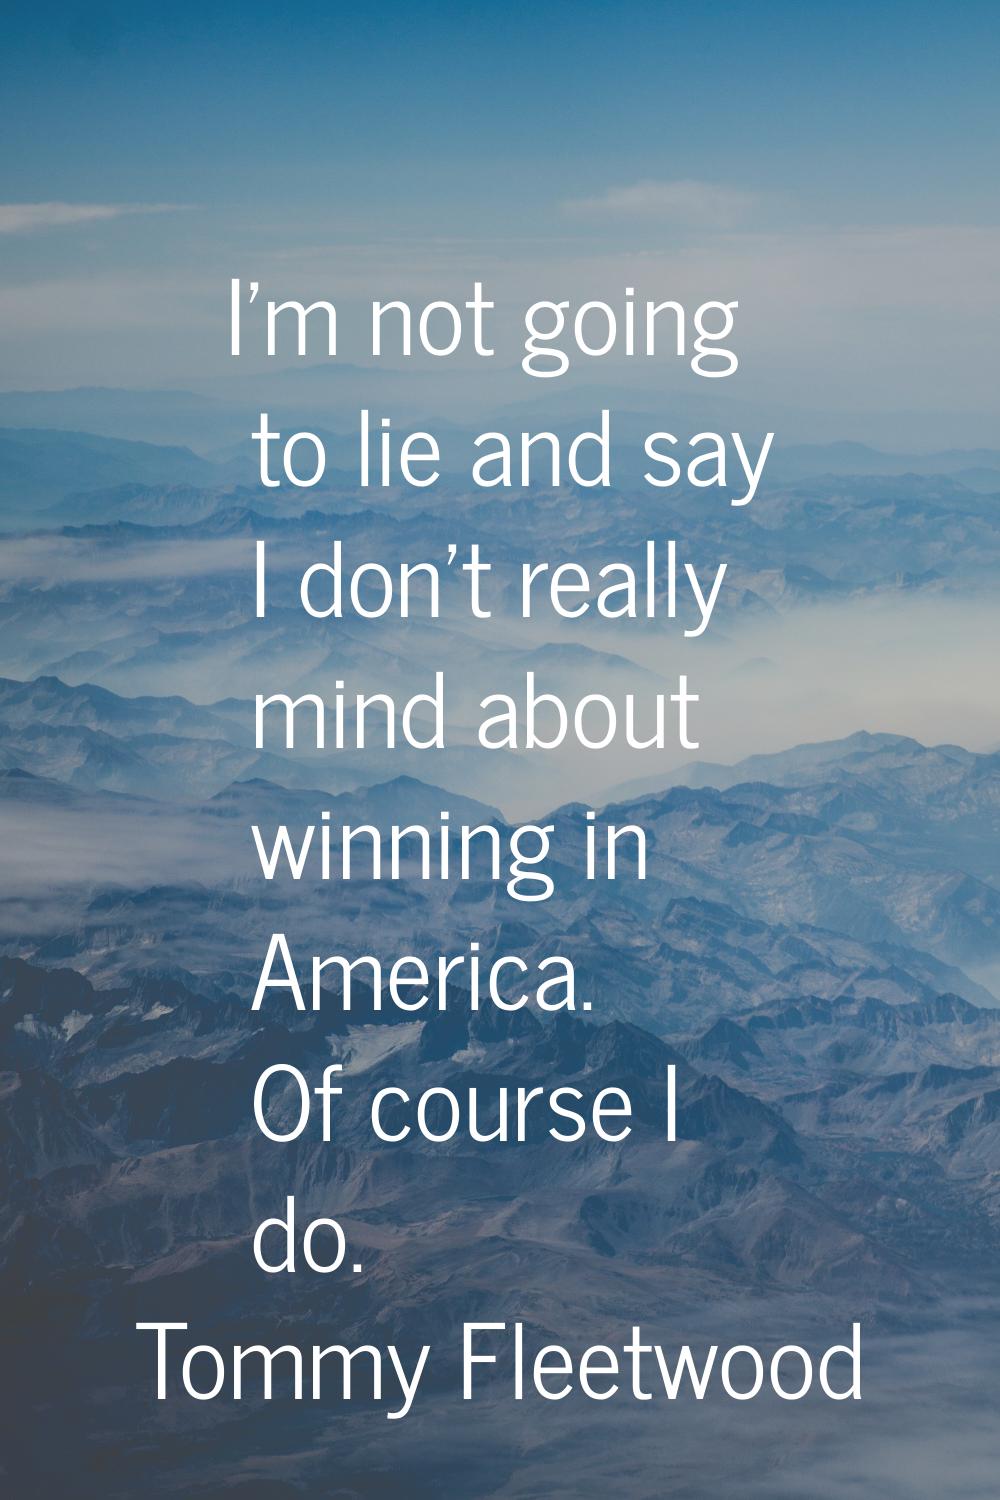 I'm not going to lie and say I don't really mind about winning in America. Of course I do.